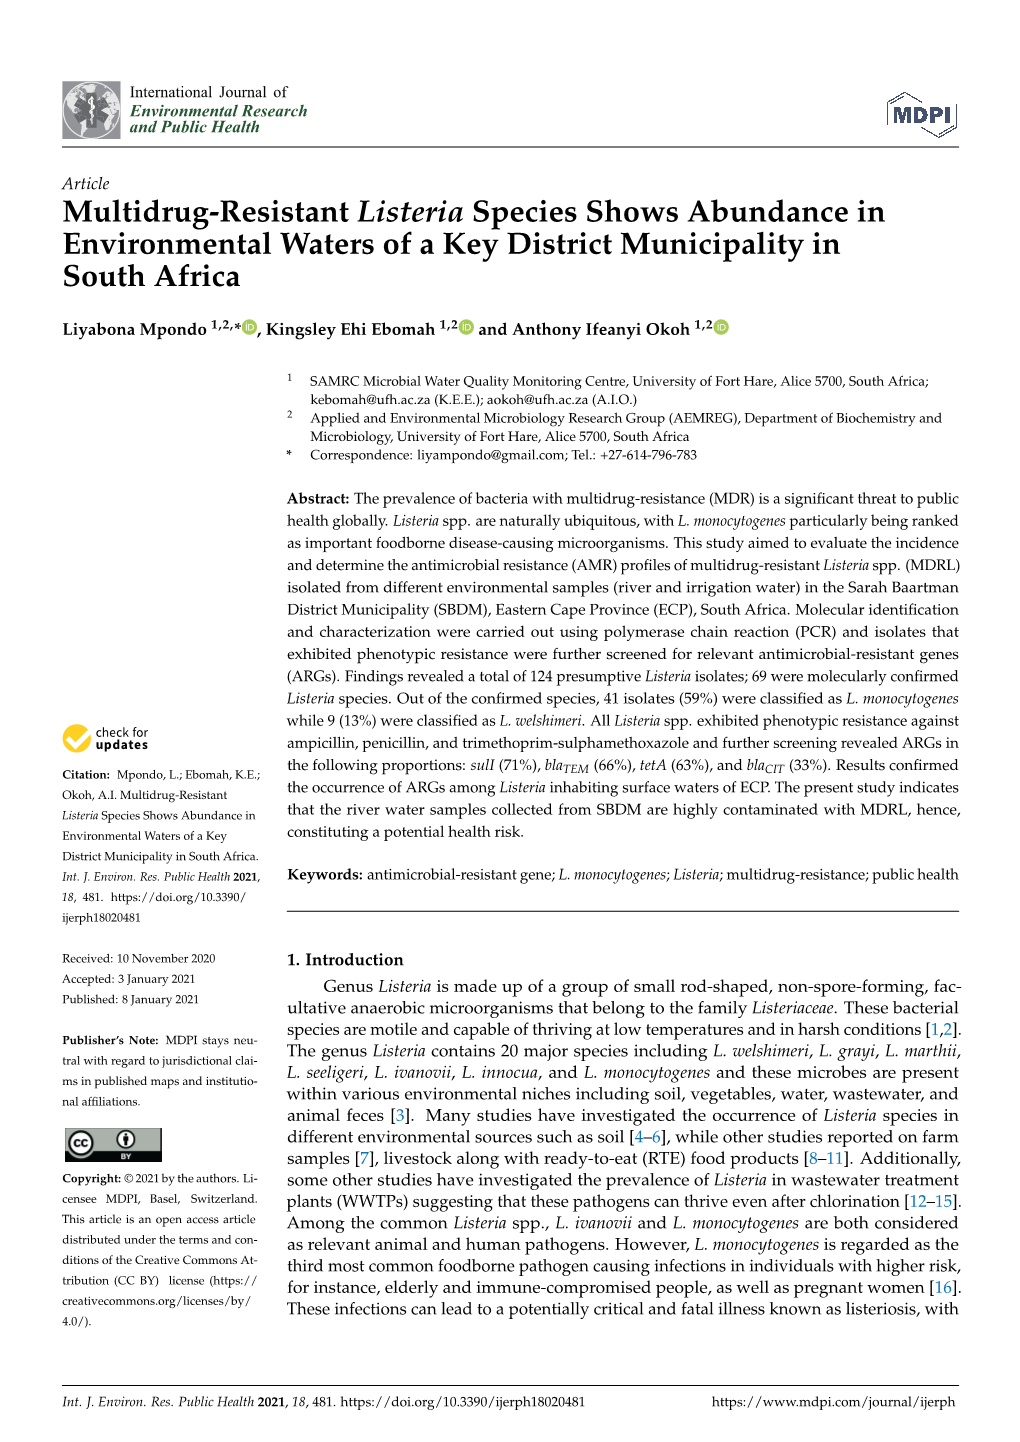 Multidrug-Resistant Listeria Species Shows Abundance in Environmental Waters of a Key District Municipality in South Africa